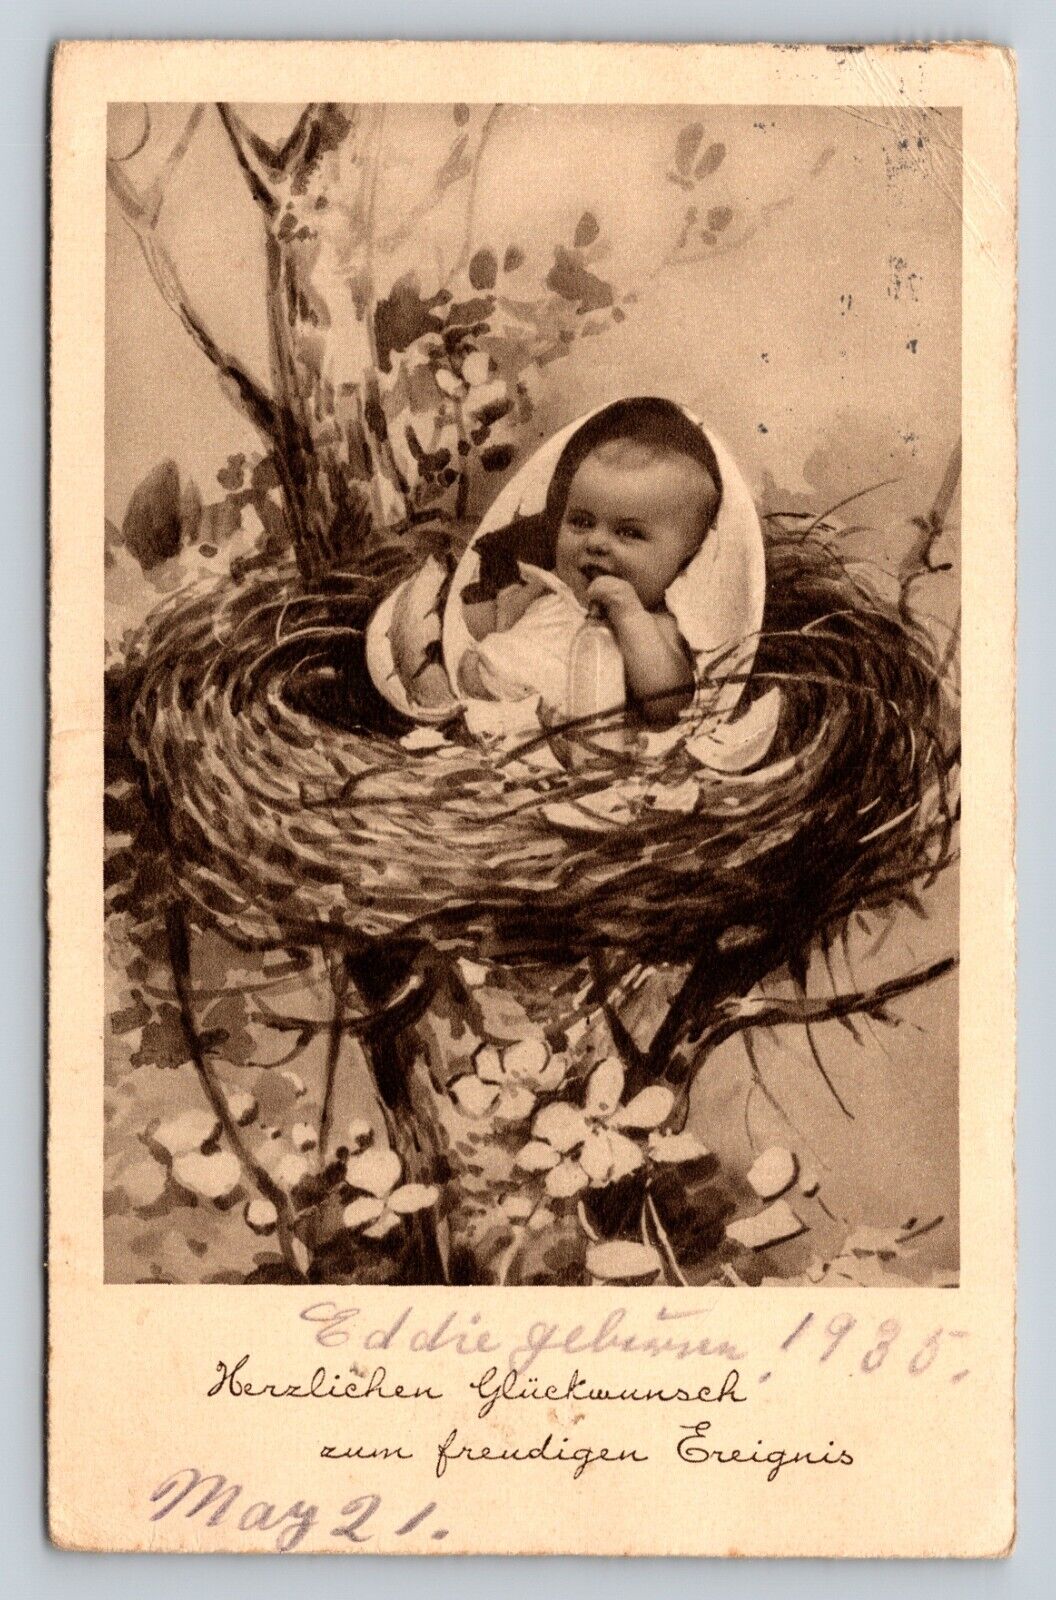 c1935 Baby In Egg Congratulations On The Joyful Occasion Vintage Postcard 0944